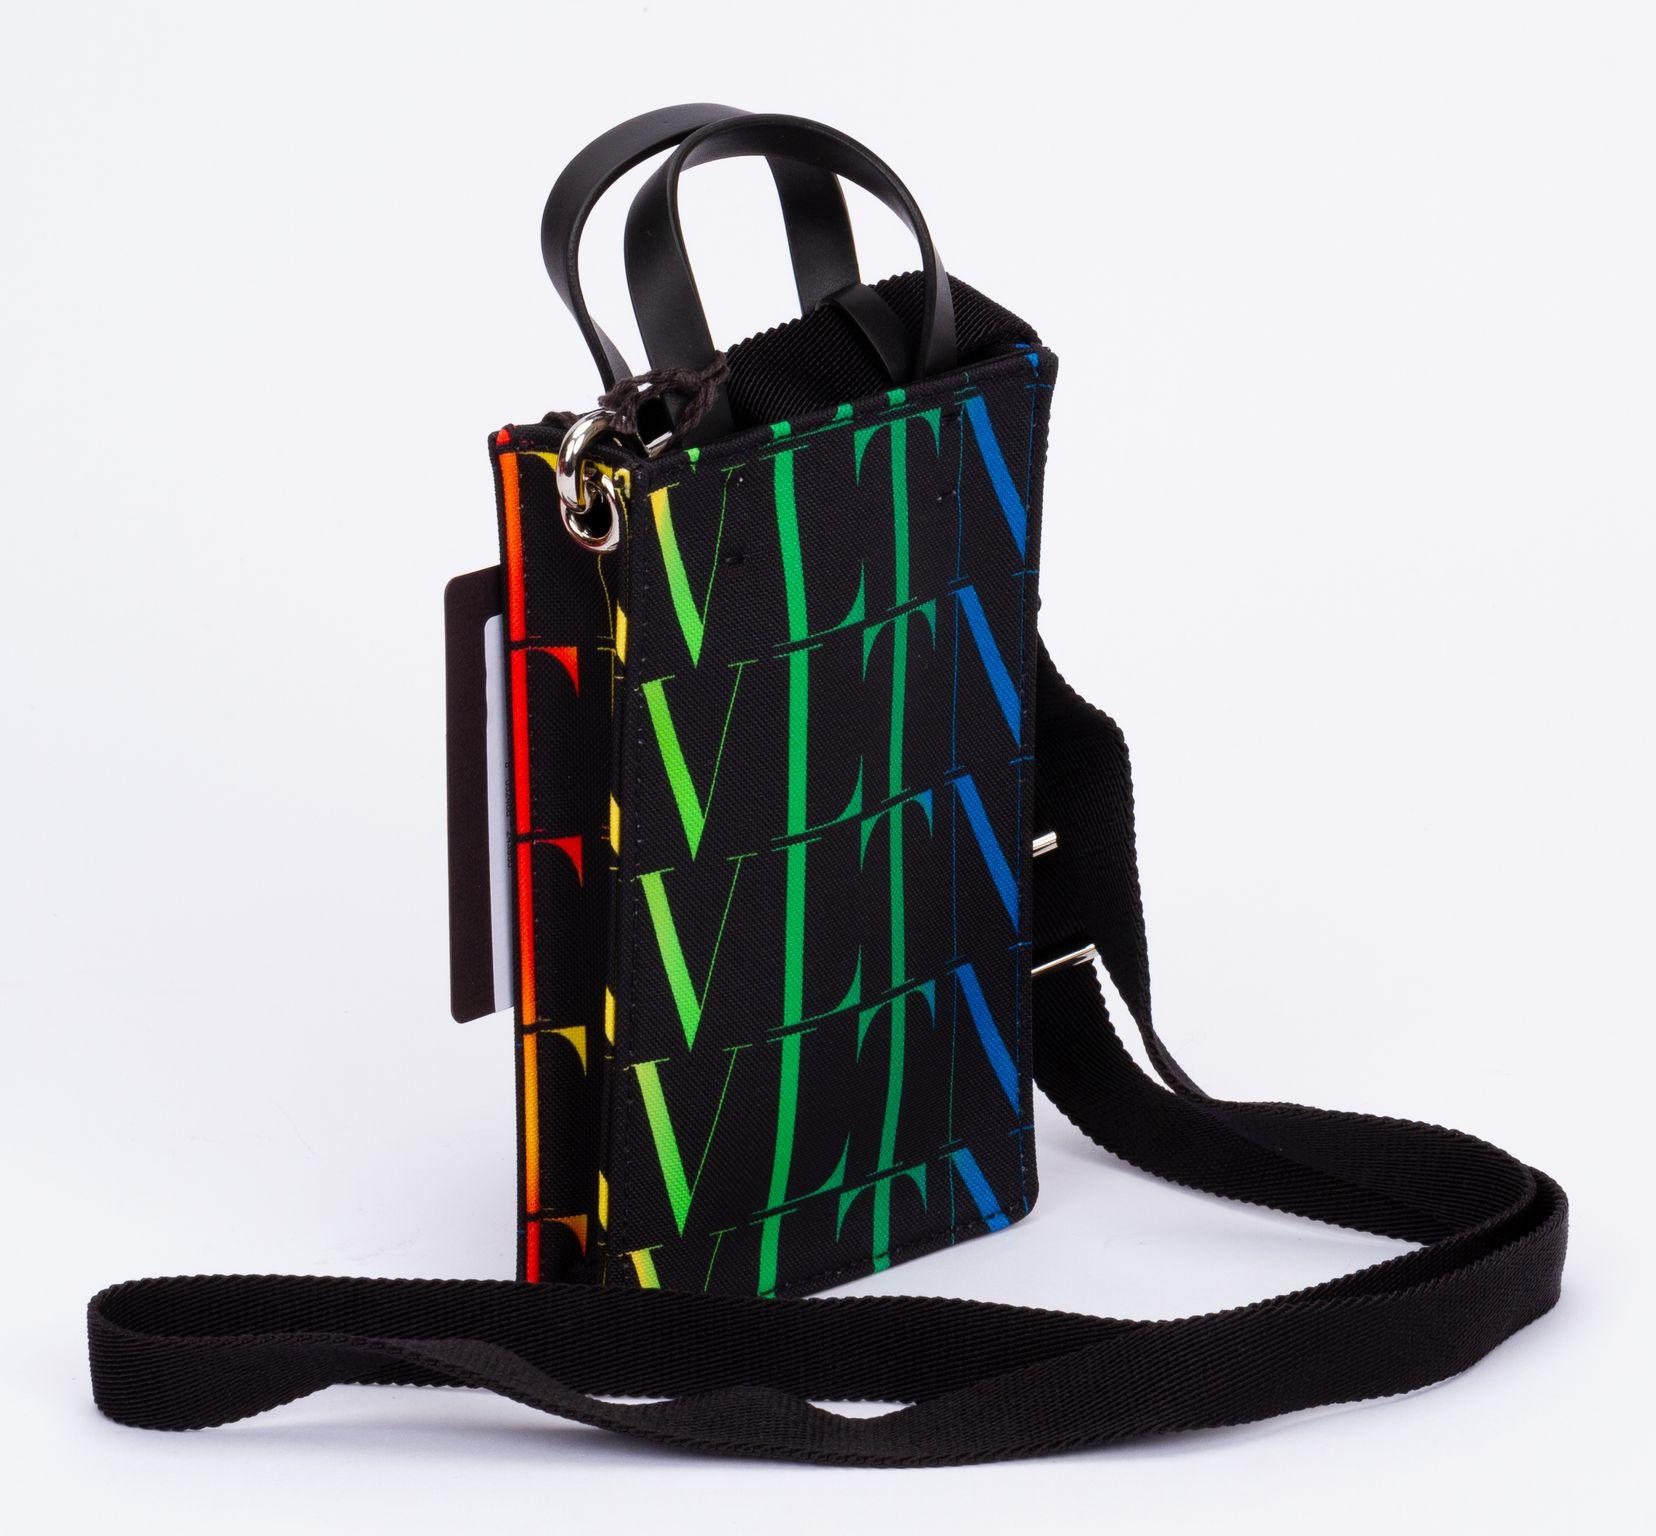 Valentino bag made out of leather with the logo printed on it which fades from green to blue. The bag comes with a adjustable and detachable shoulder strap (drop up to 26